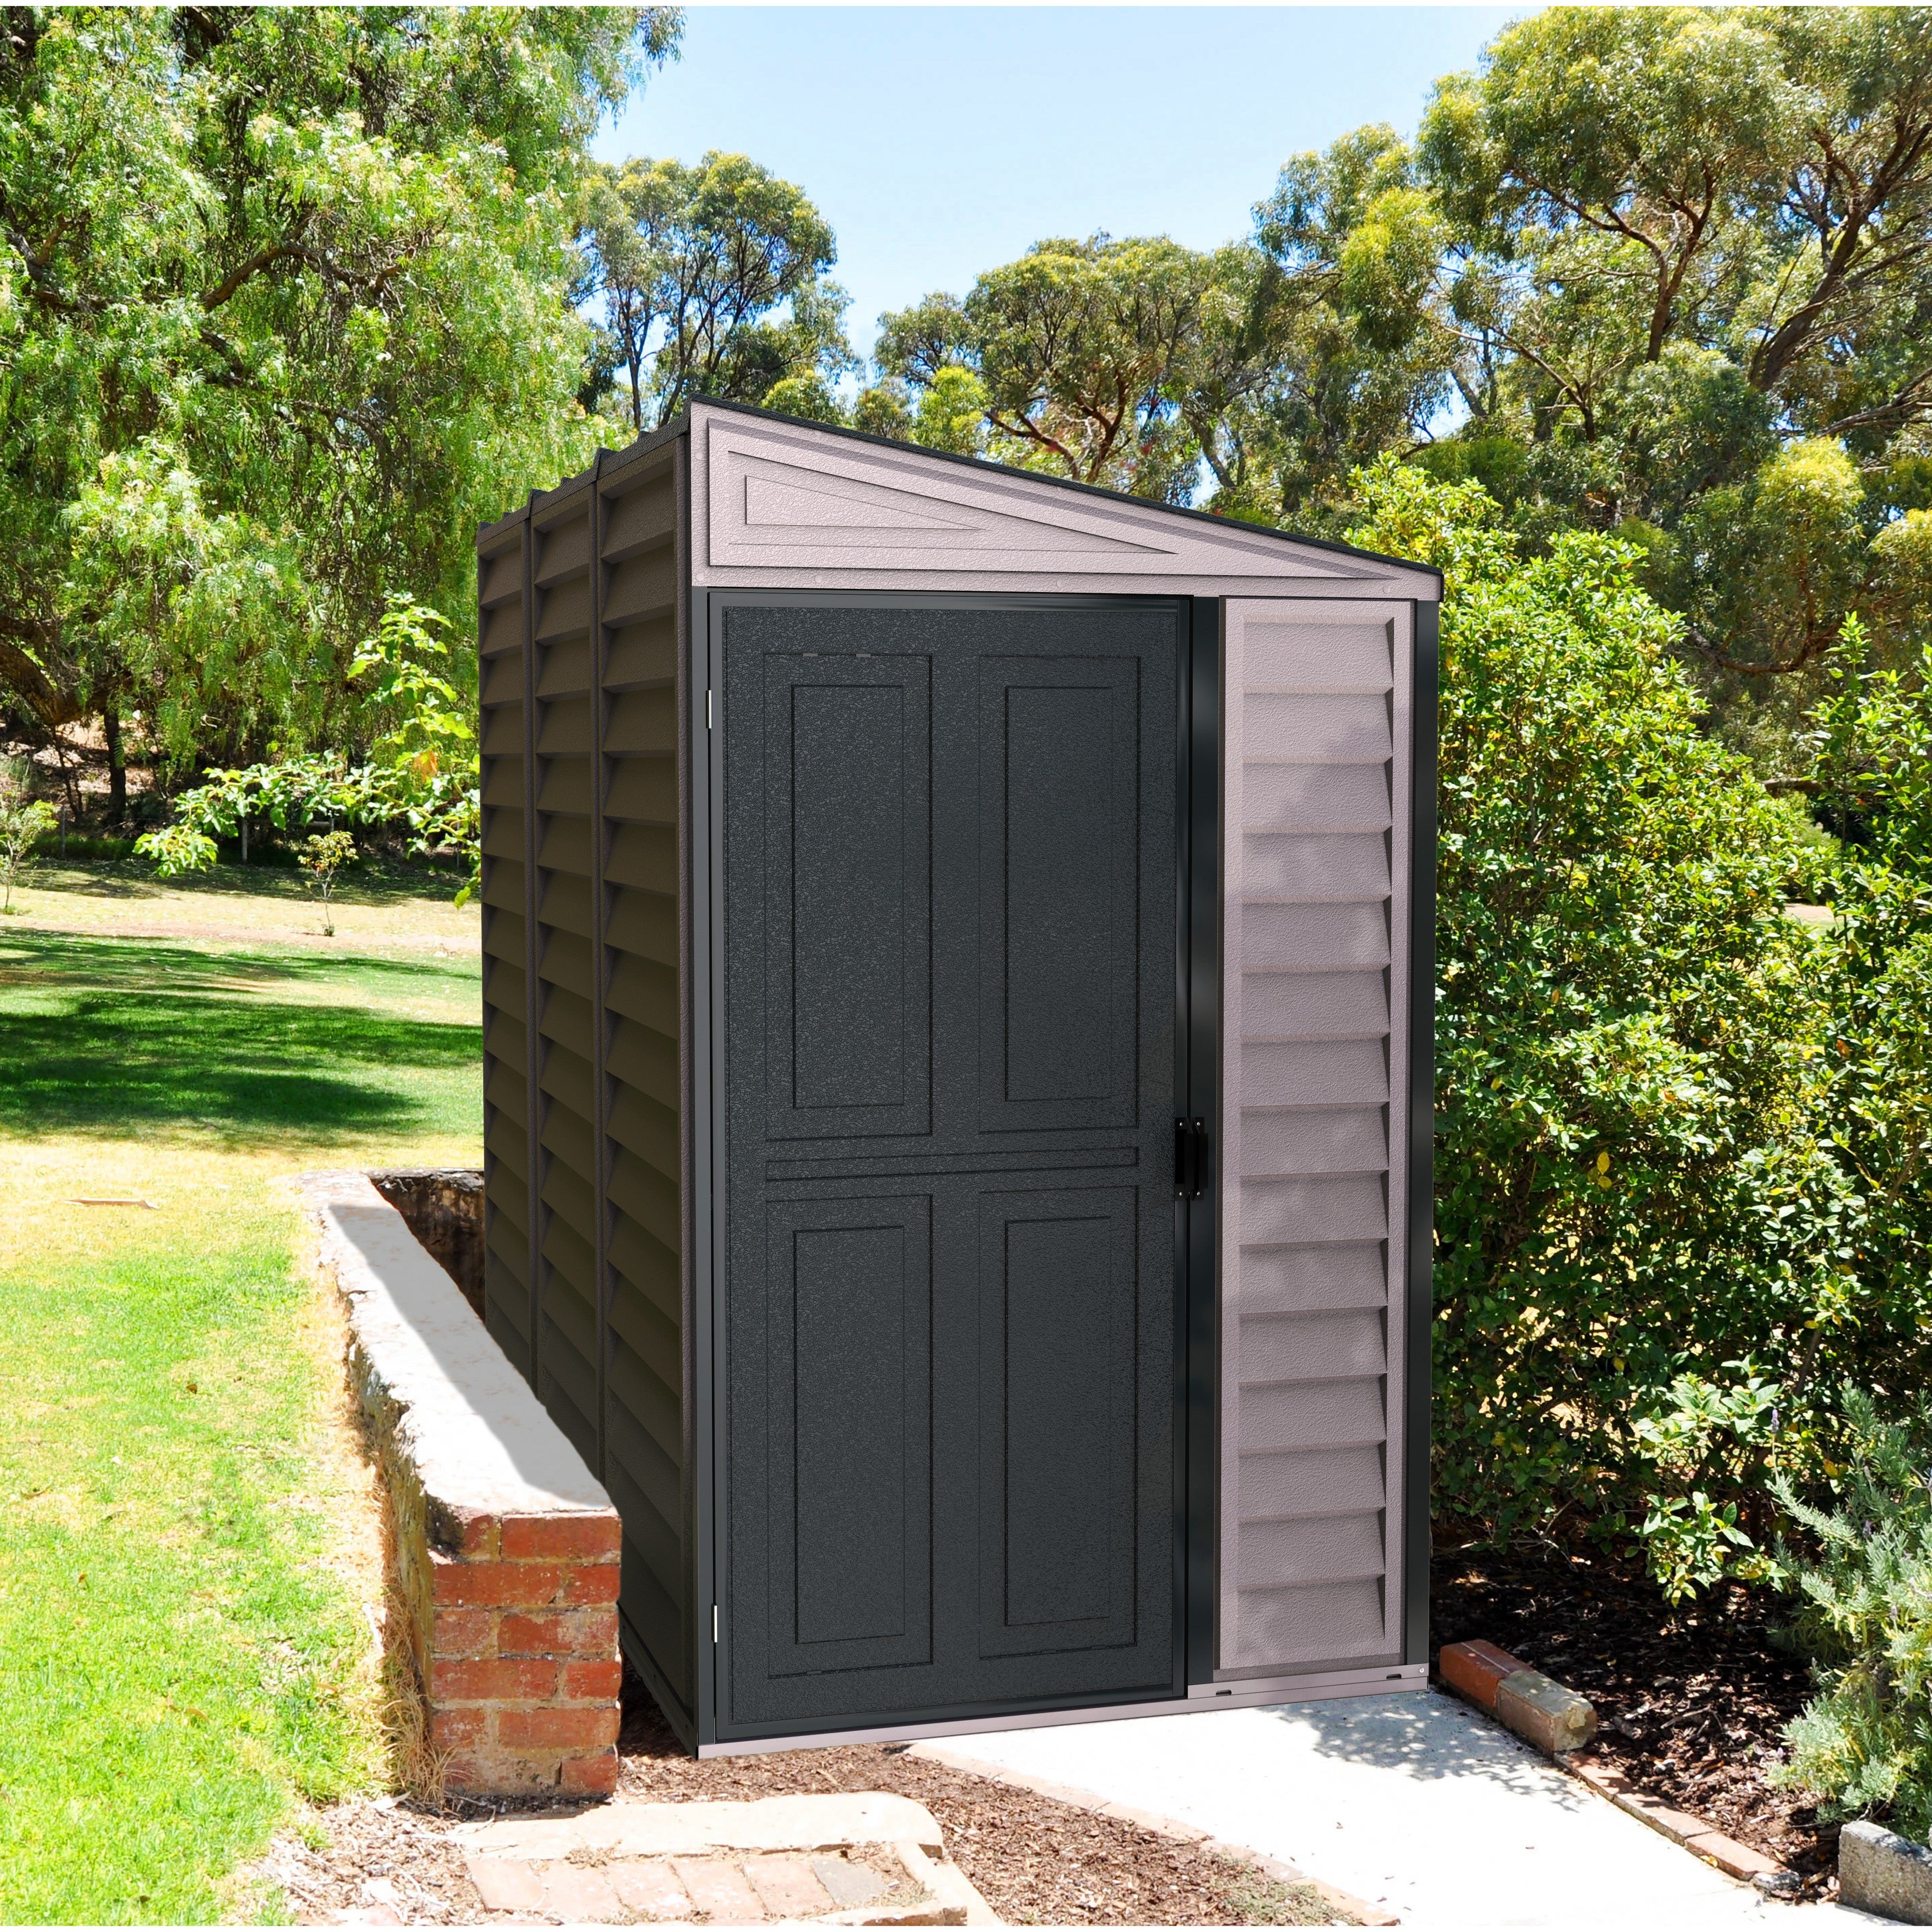 Rubbermaid Vinyl & Resin Storage Sheds at